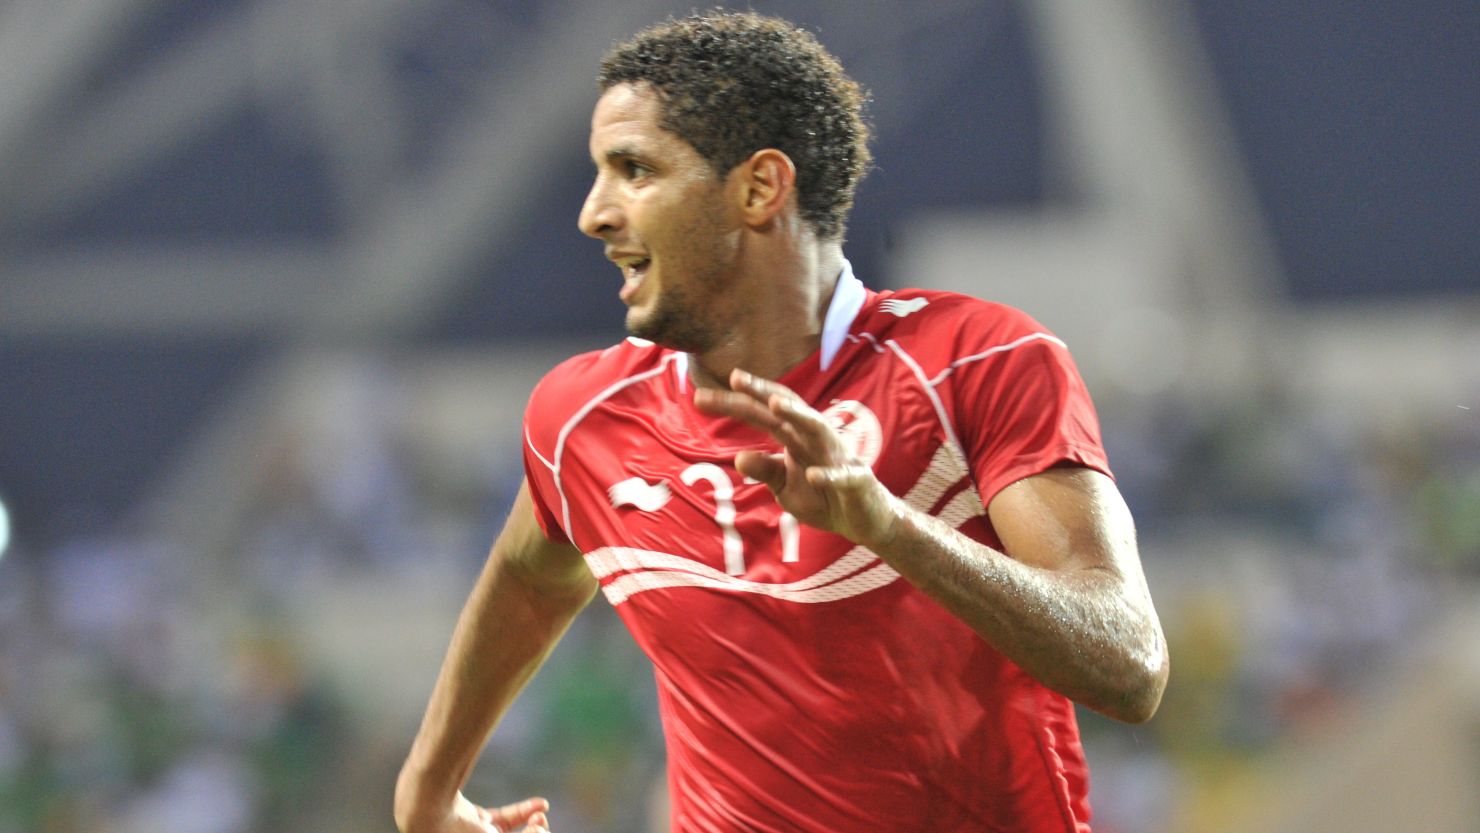 Tunisia's Issam Jemaa celebrates his winning goal as his side beat Niger in the Africa Cup of Nations.